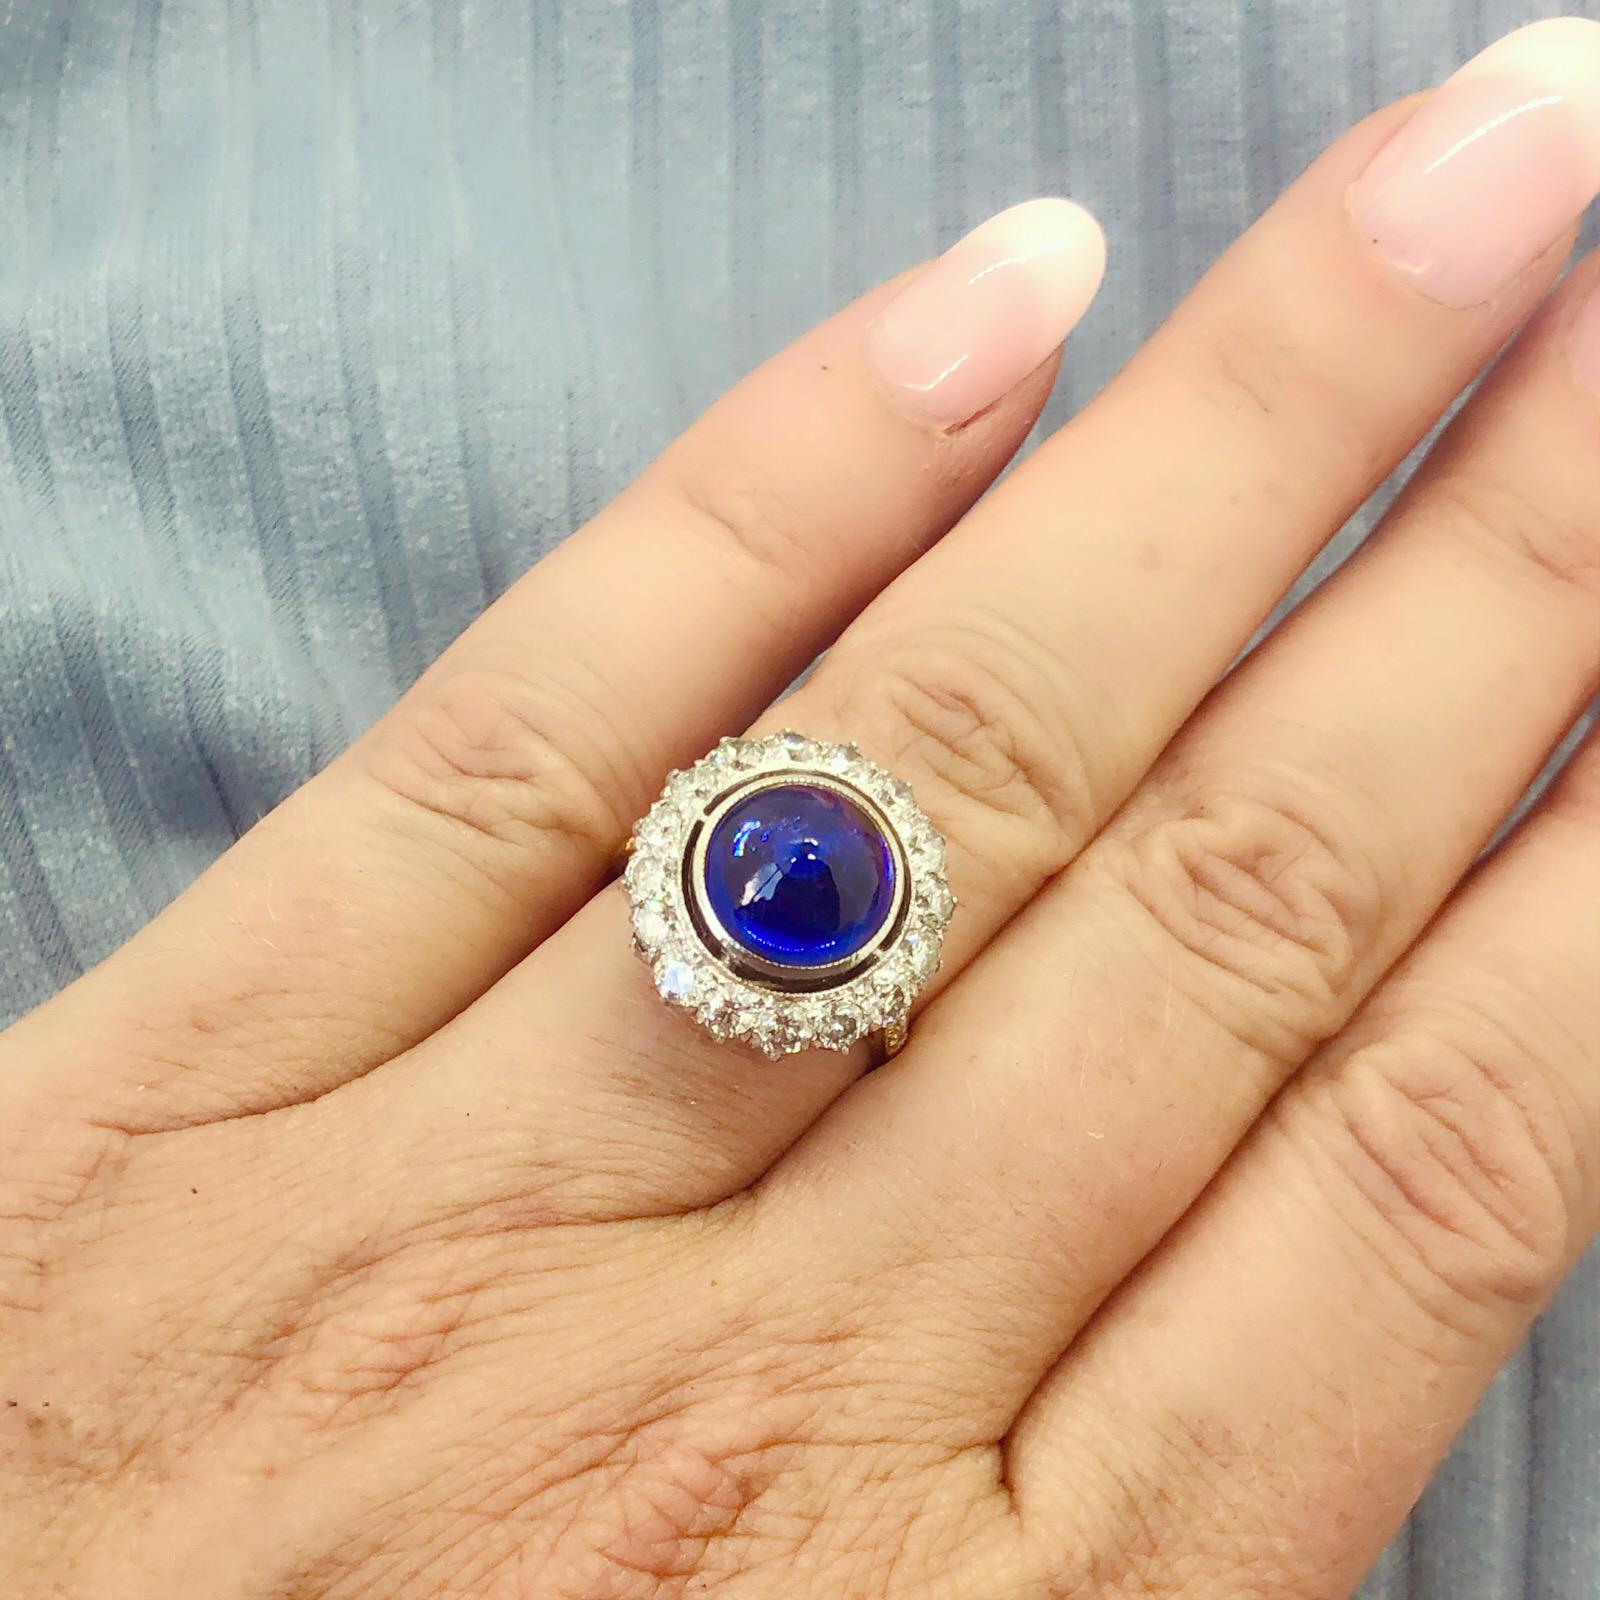 Classic and unique, this beautiful 18k gold two-tone ring features a bullet cabochon Ceylon sapphire weighing 5.52-cts, surrounded by 16 round brilliant-cut diamonds, and with diamond-set shoulders, weighing together a total of 1.57cts. The ring